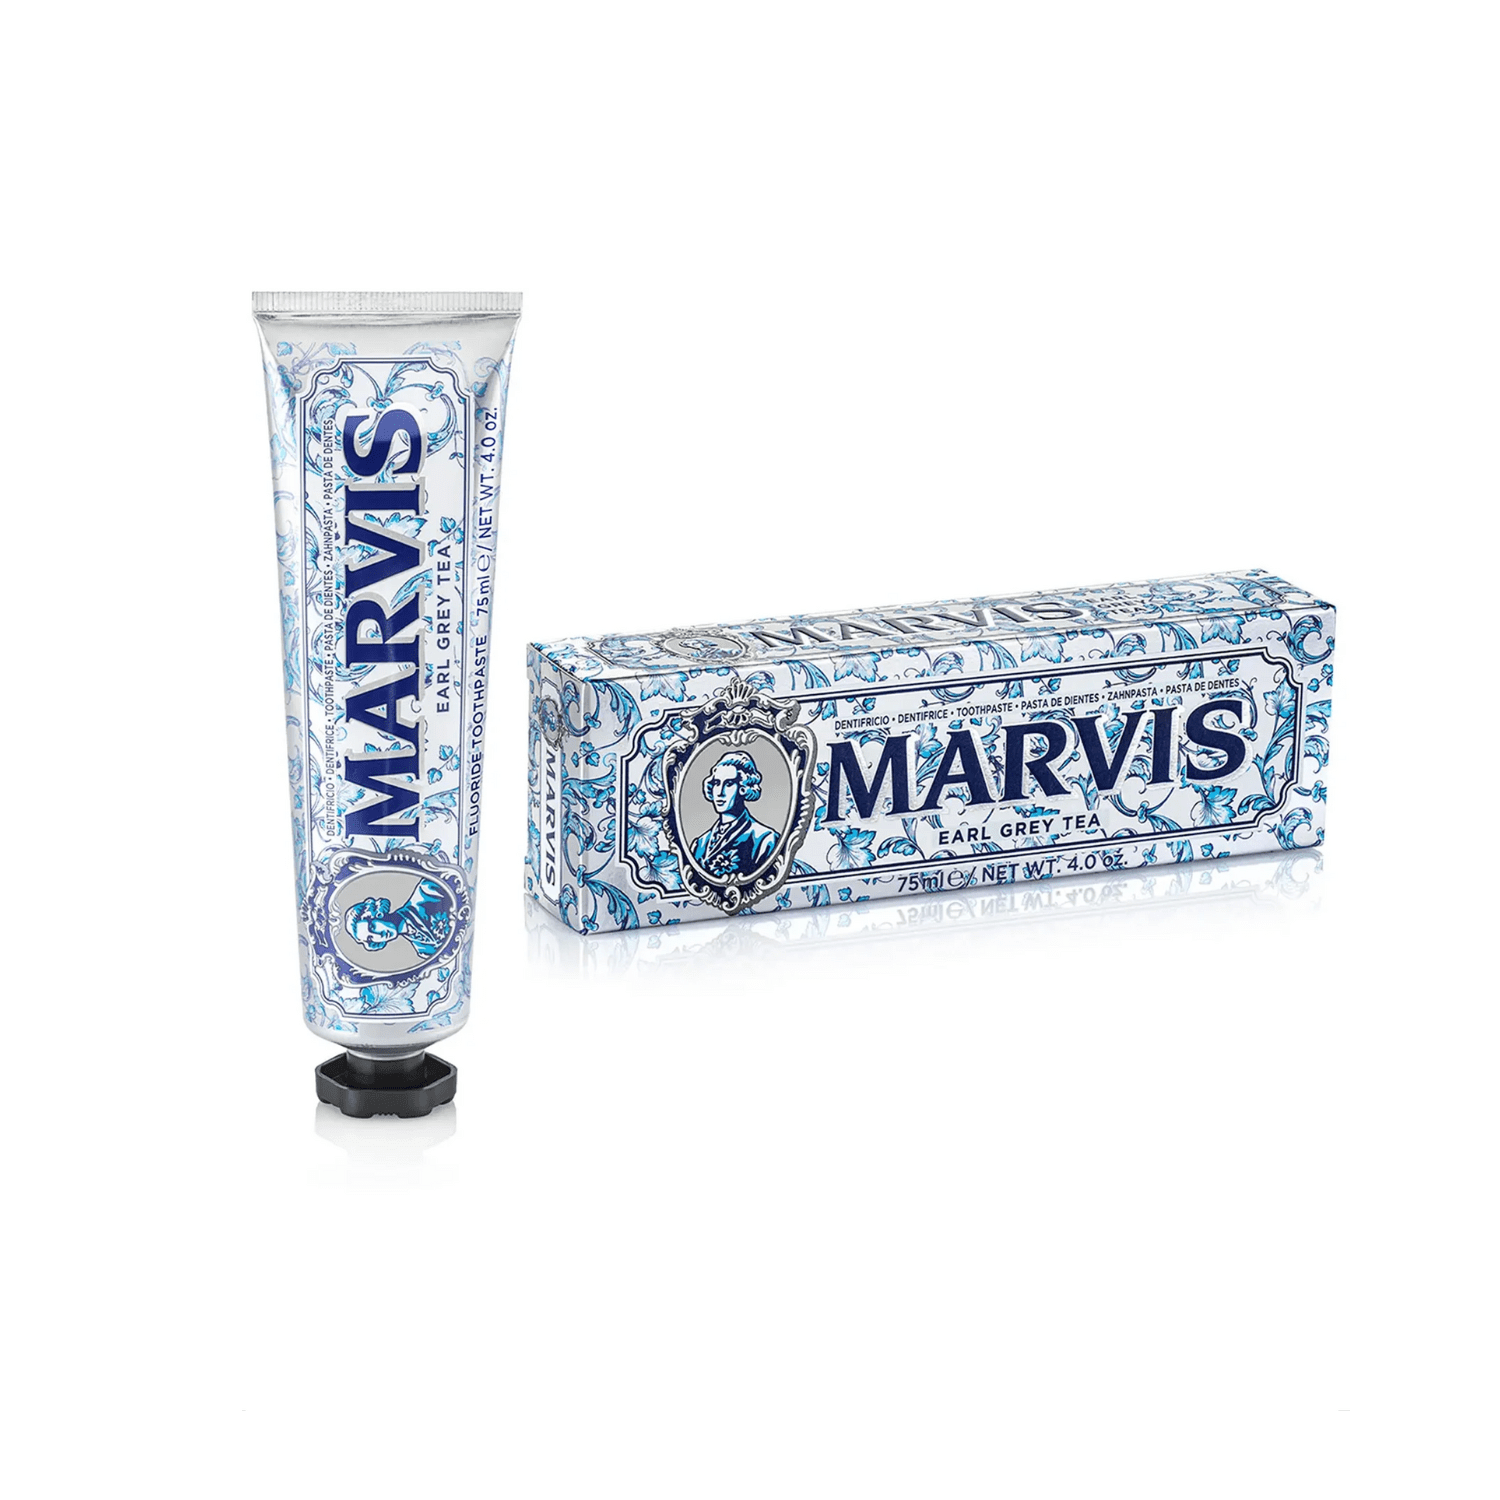 Marvis Toothpaste Earl Grey 75ml